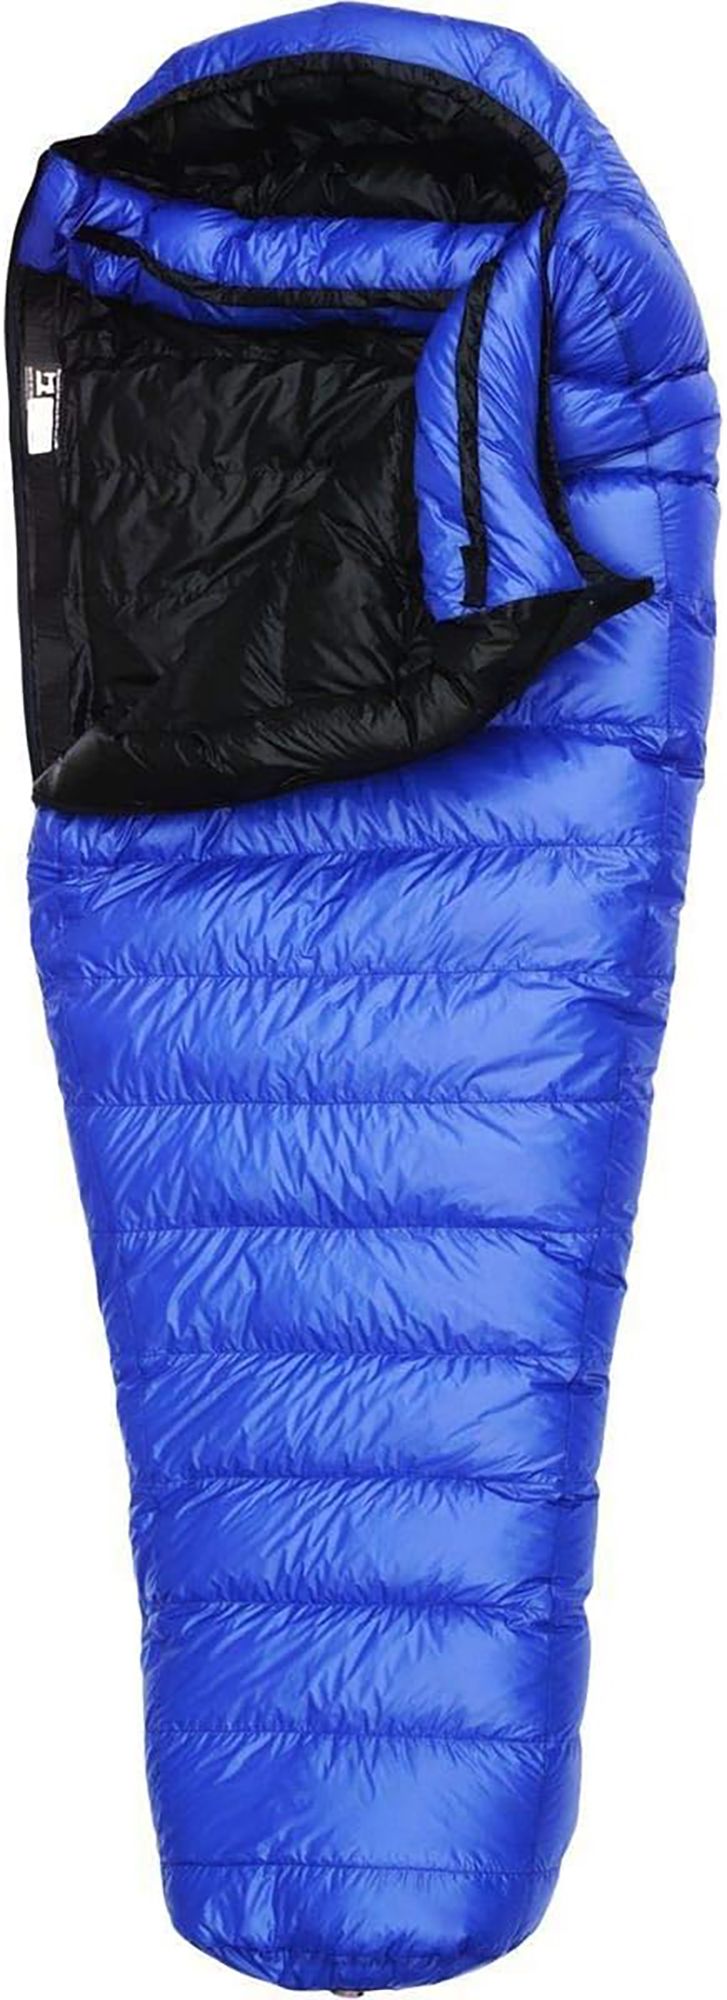 Photos - Suitcase / Backpack Cover Western Mountaineering UltraLite 20 Degree Sleeping Bag, Men's, Royal Blue